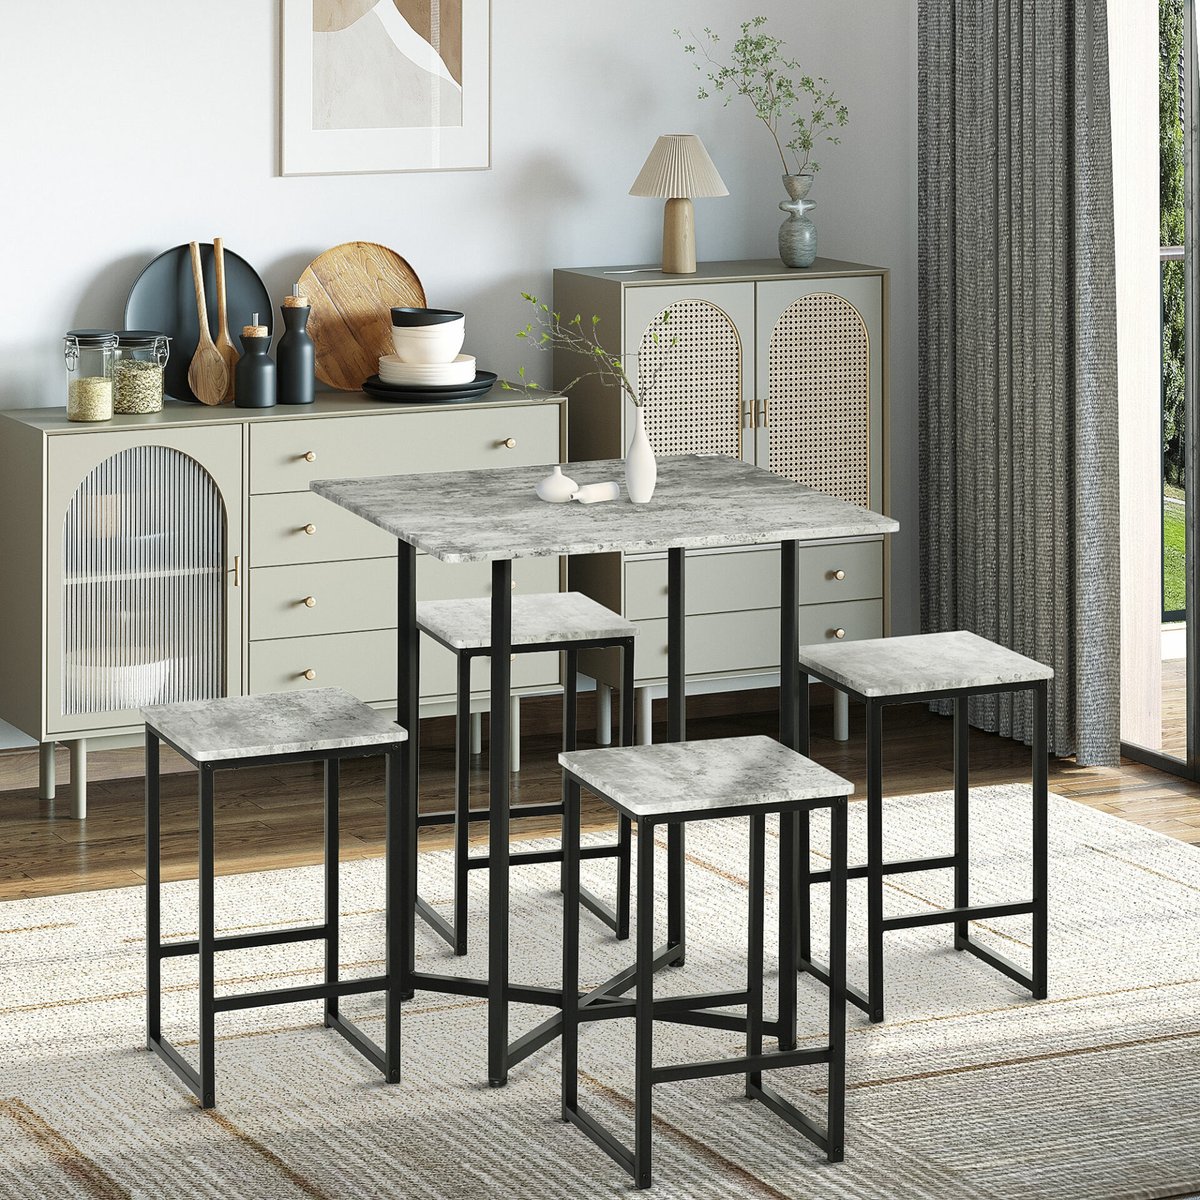 The stools in this set easily fit under the table, perfect for small kitchens and dining spaces.
#tableset #greyinteriors #modernfurniture #compactinteriors

hhmodernliving.co.uk/product/5-piec…